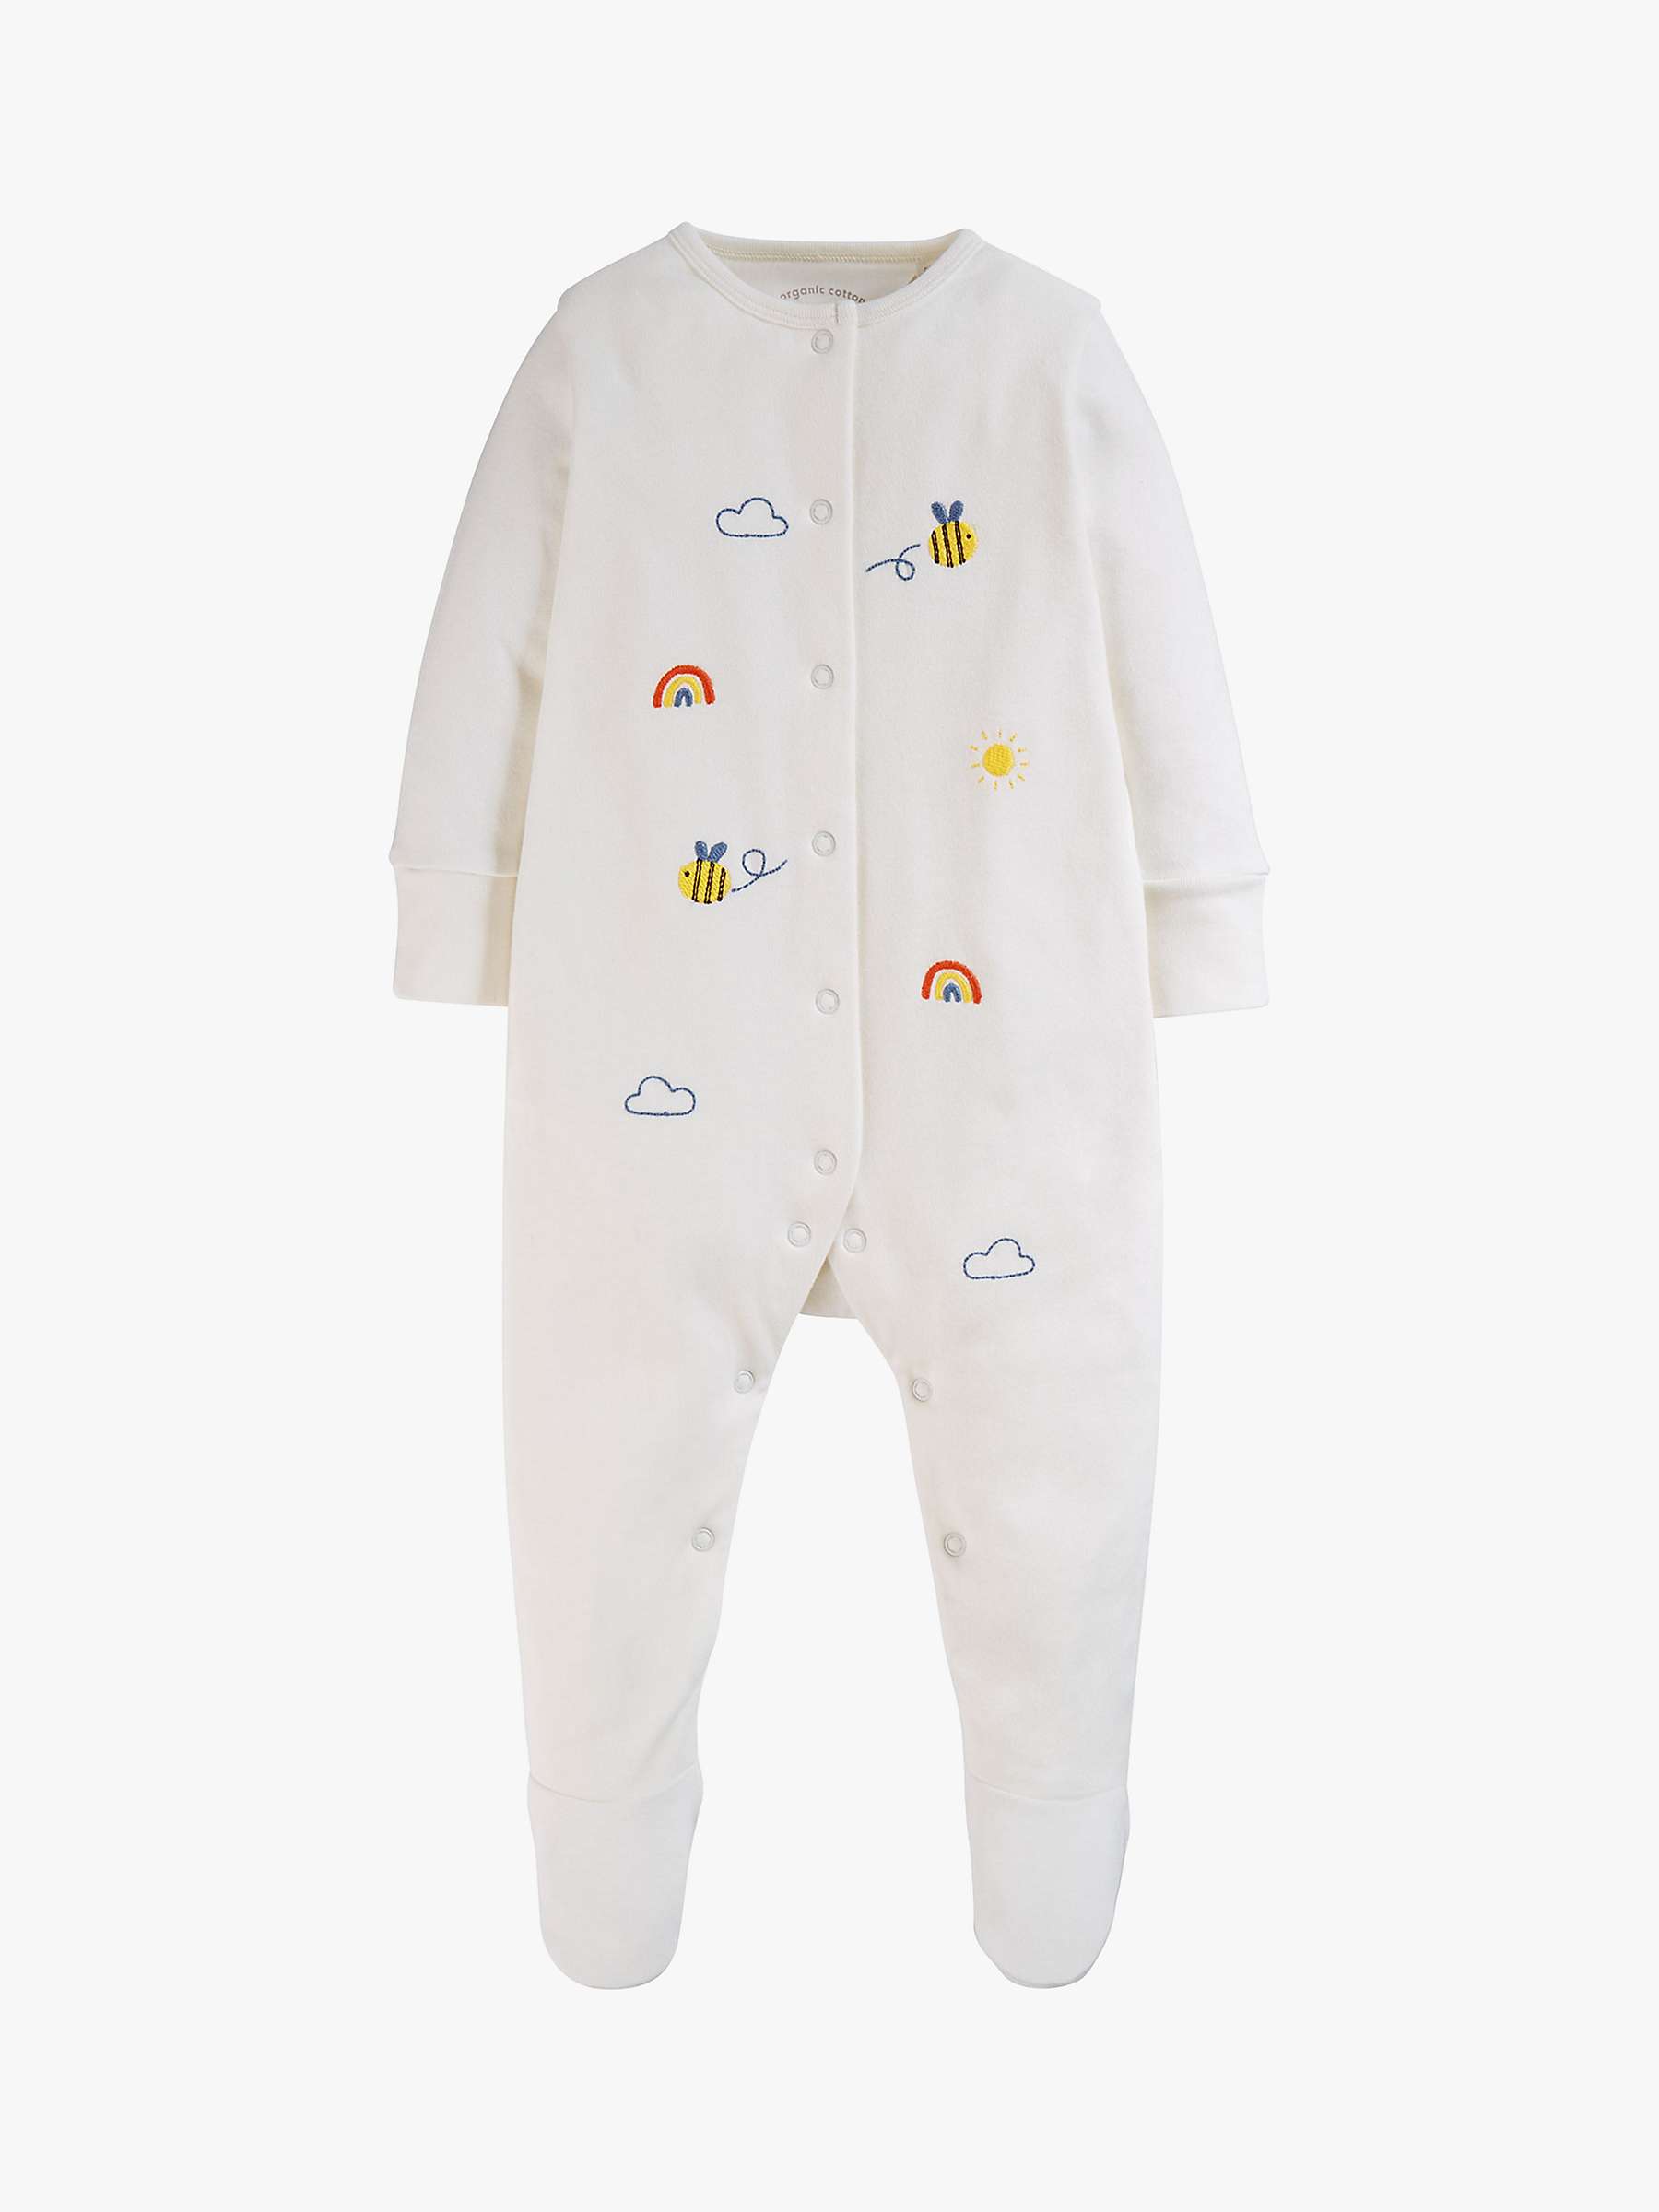 Buy Frugi Baby Buzzy Bee Organic Cotton Embroidered Babygrow, White/Multi Online at johnlewis.com